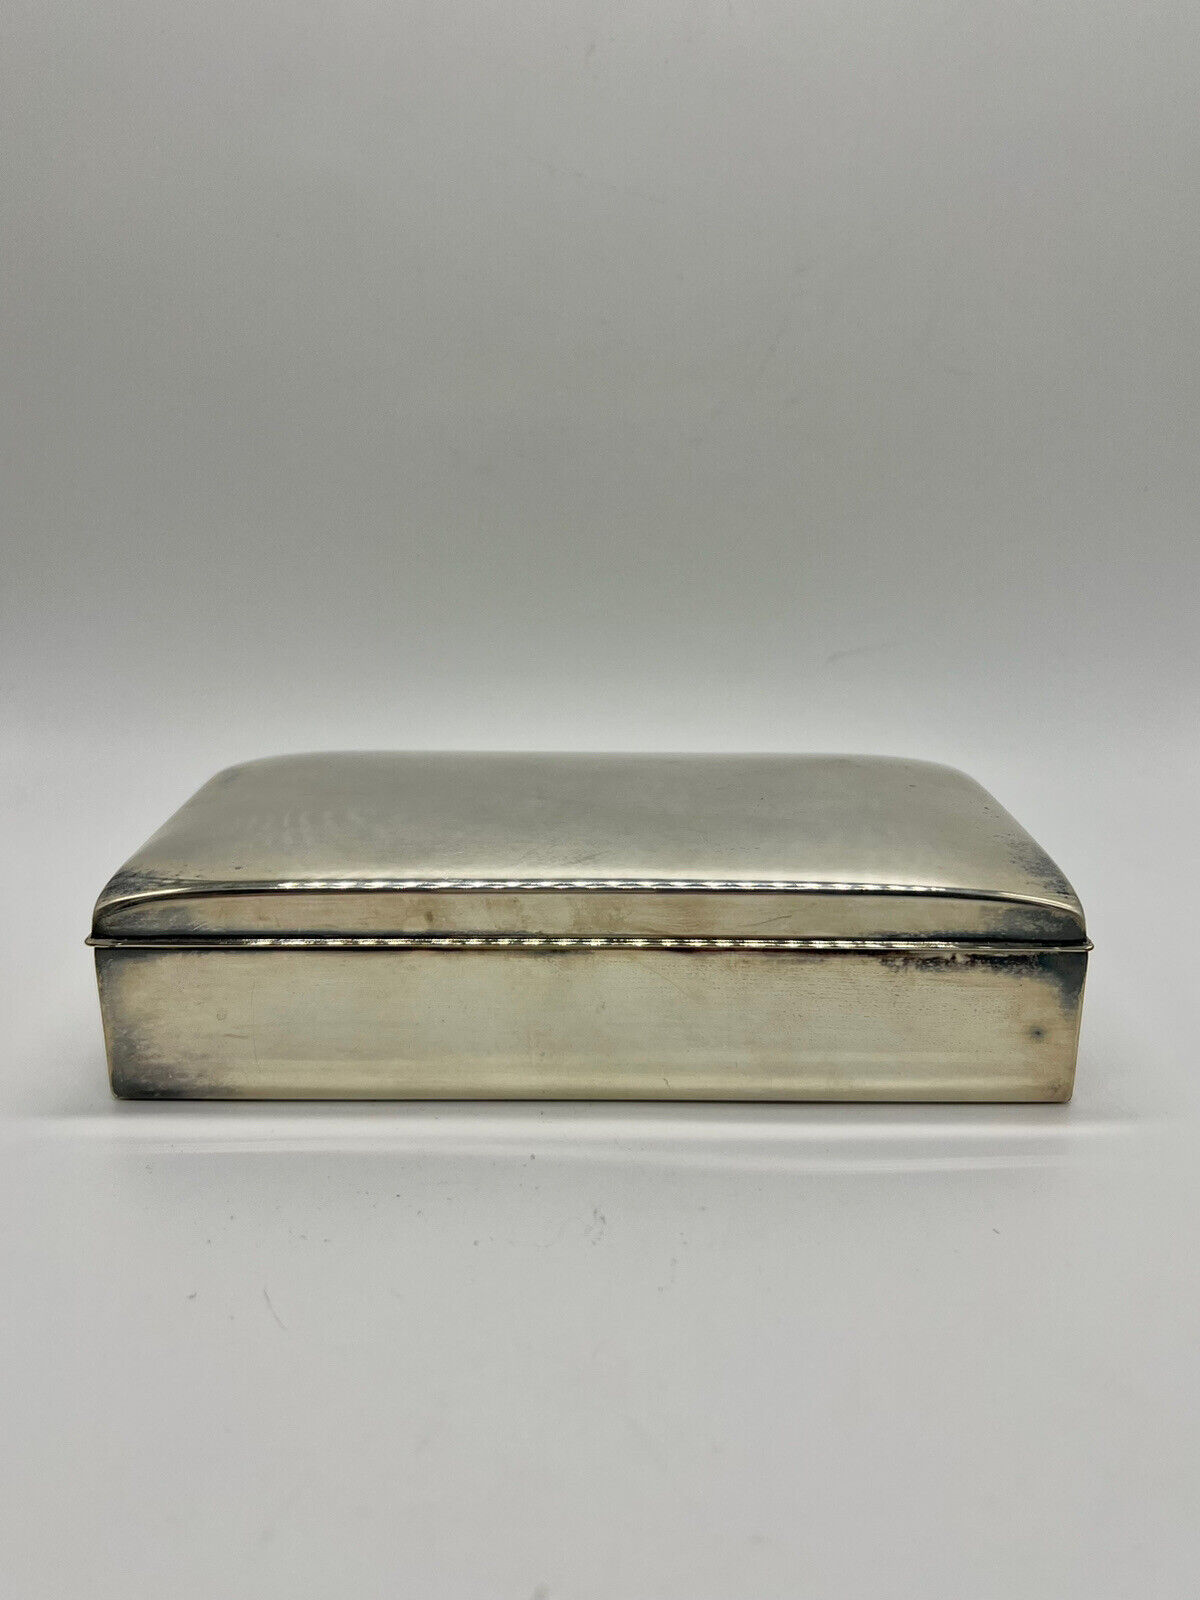 Vintage Jewelry Cigarette Box Wood Lining EPCA Poole Silver Co 1899